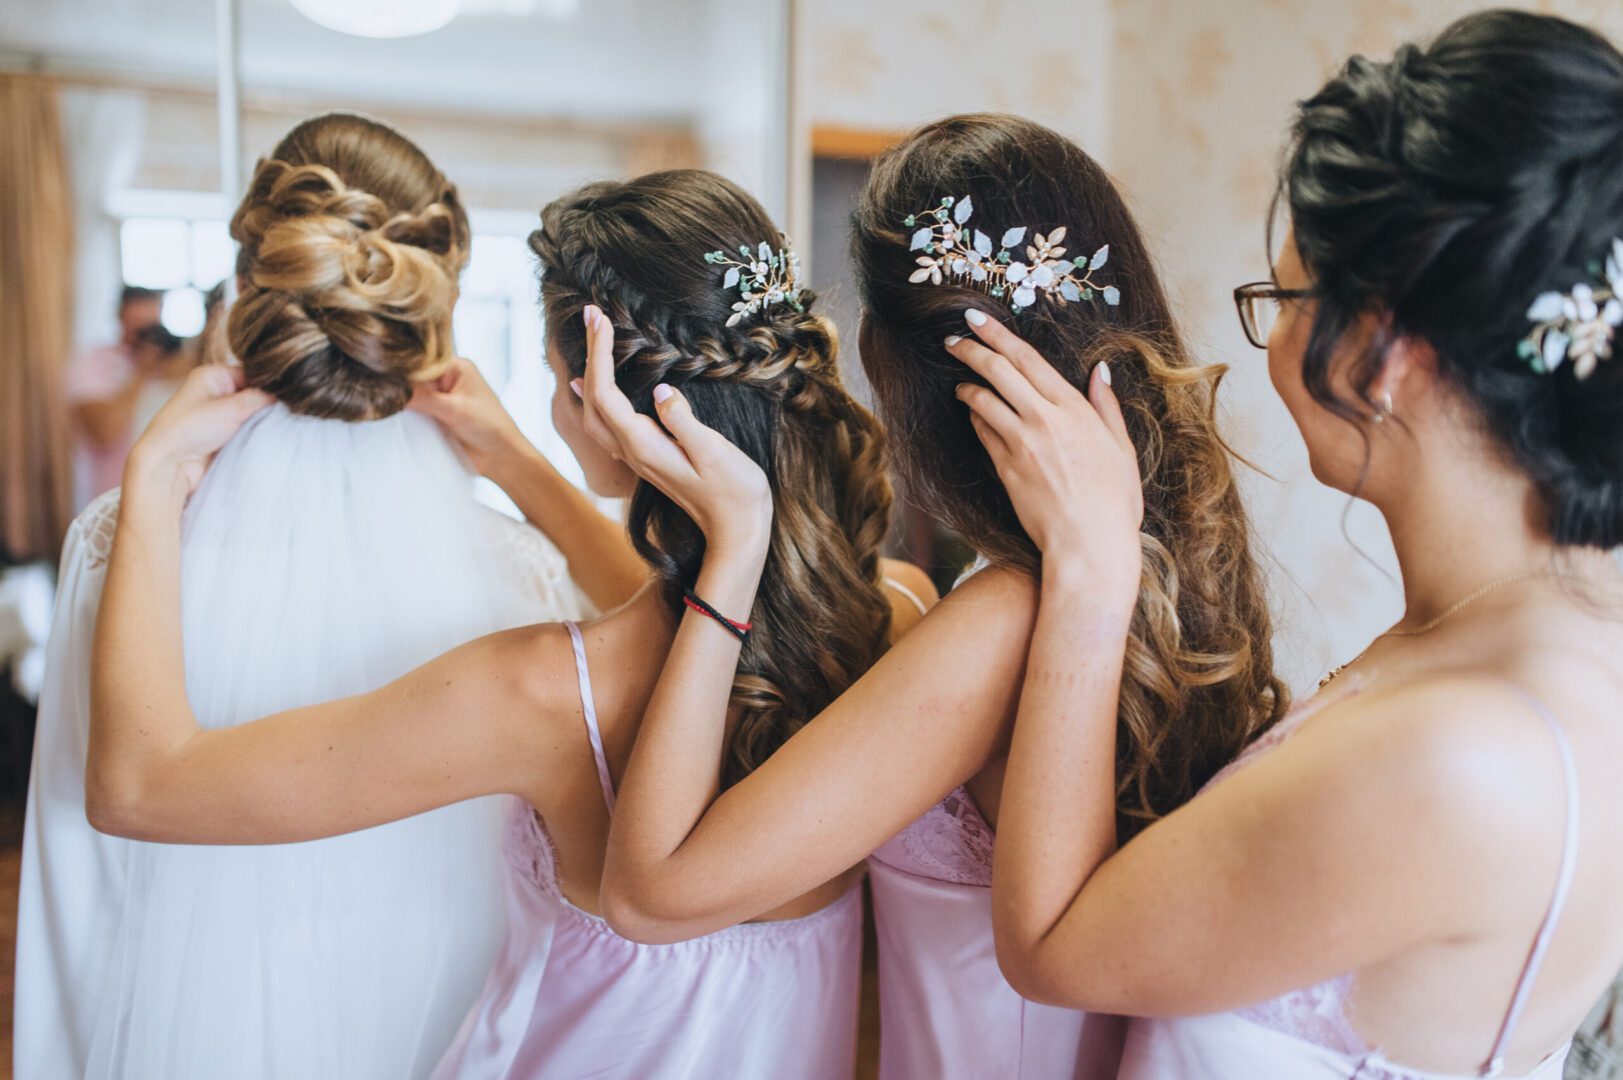 A bride surrounded by bridesmaids